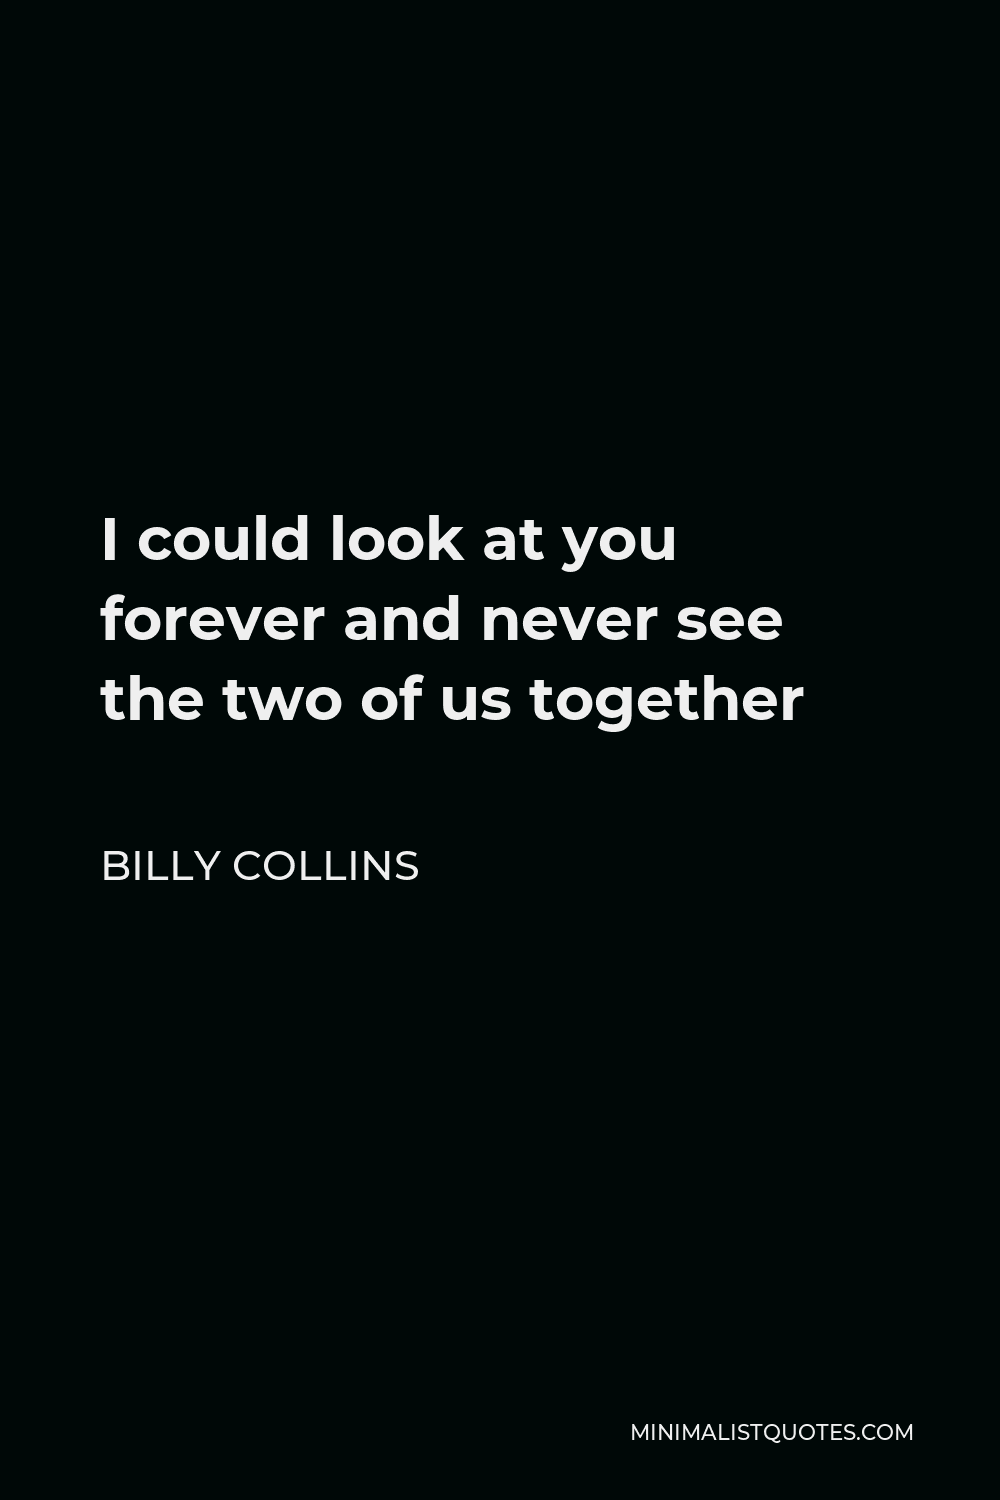 Billy Collins Quote - I could look at you forever and never see the two of us together